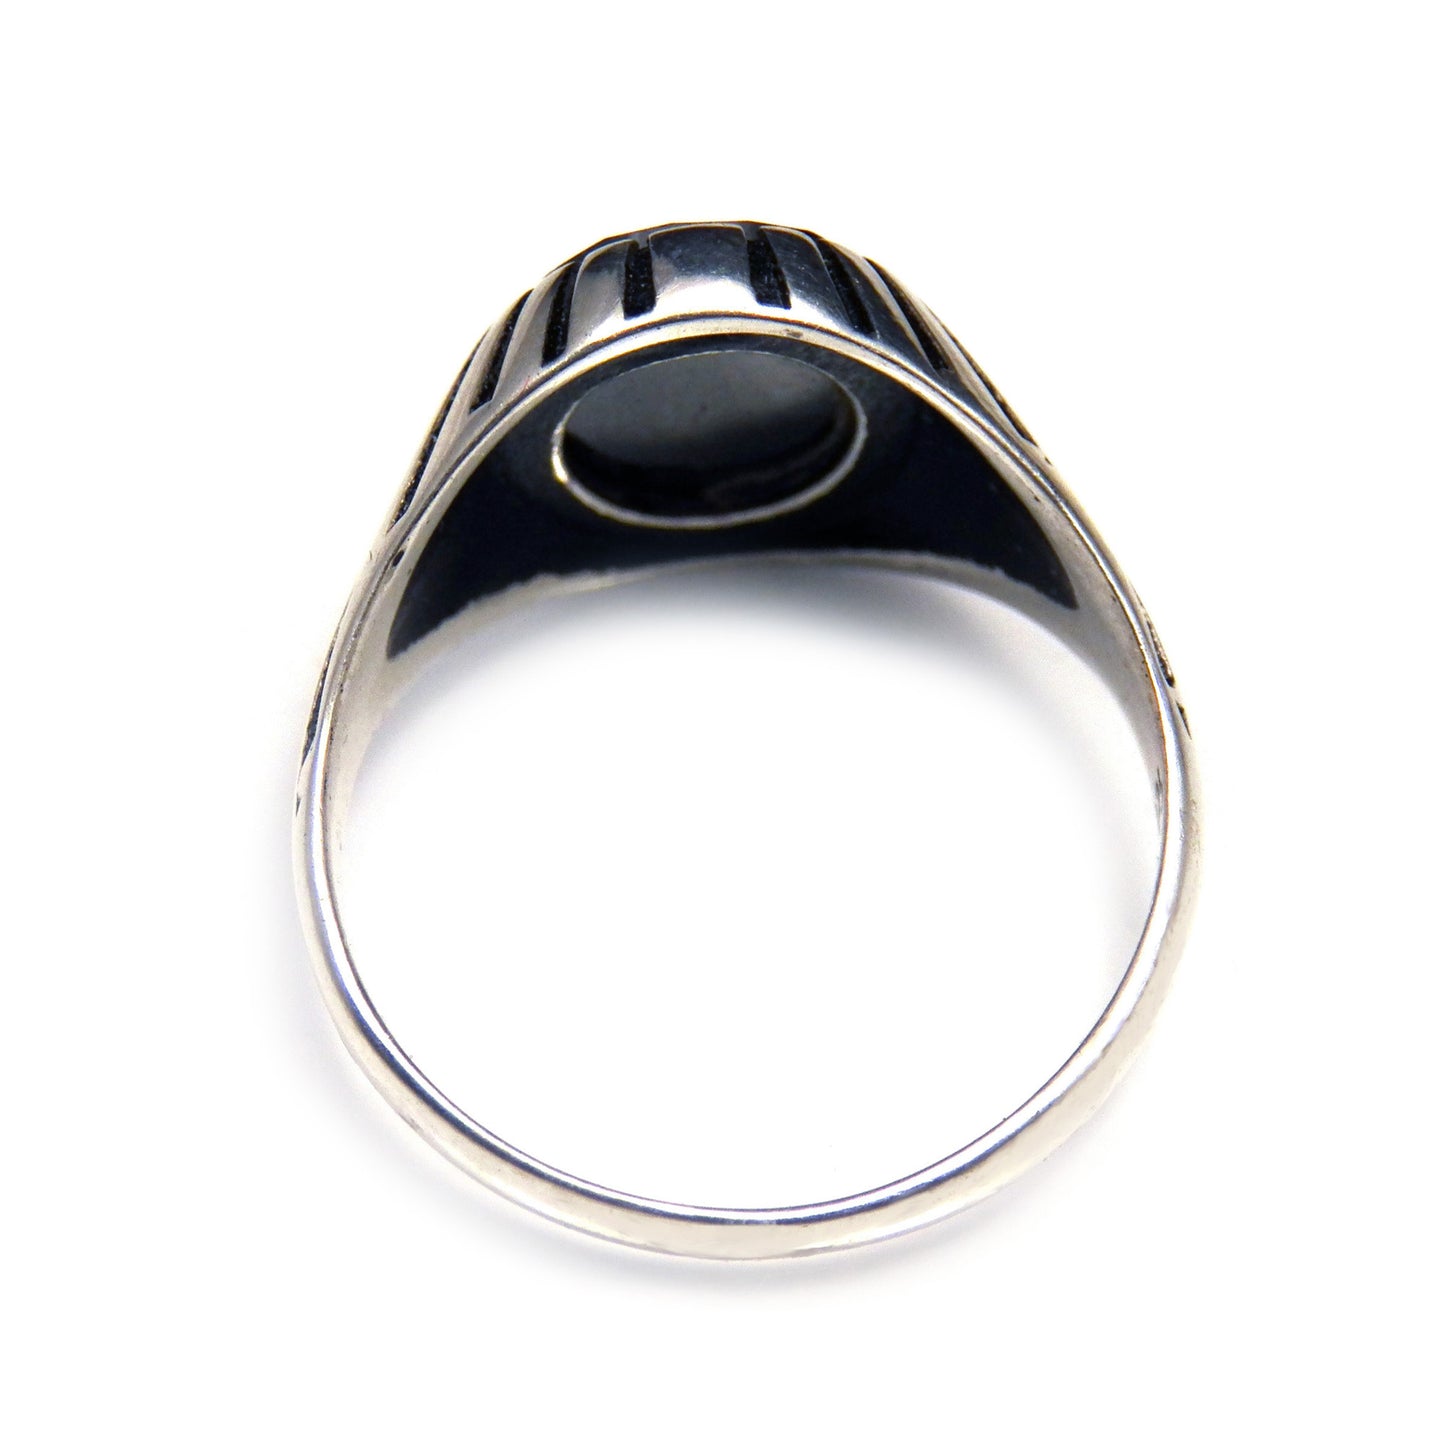 Faceted Black Spinel Ring for Men, Sterling Silver Vintage Jewelry